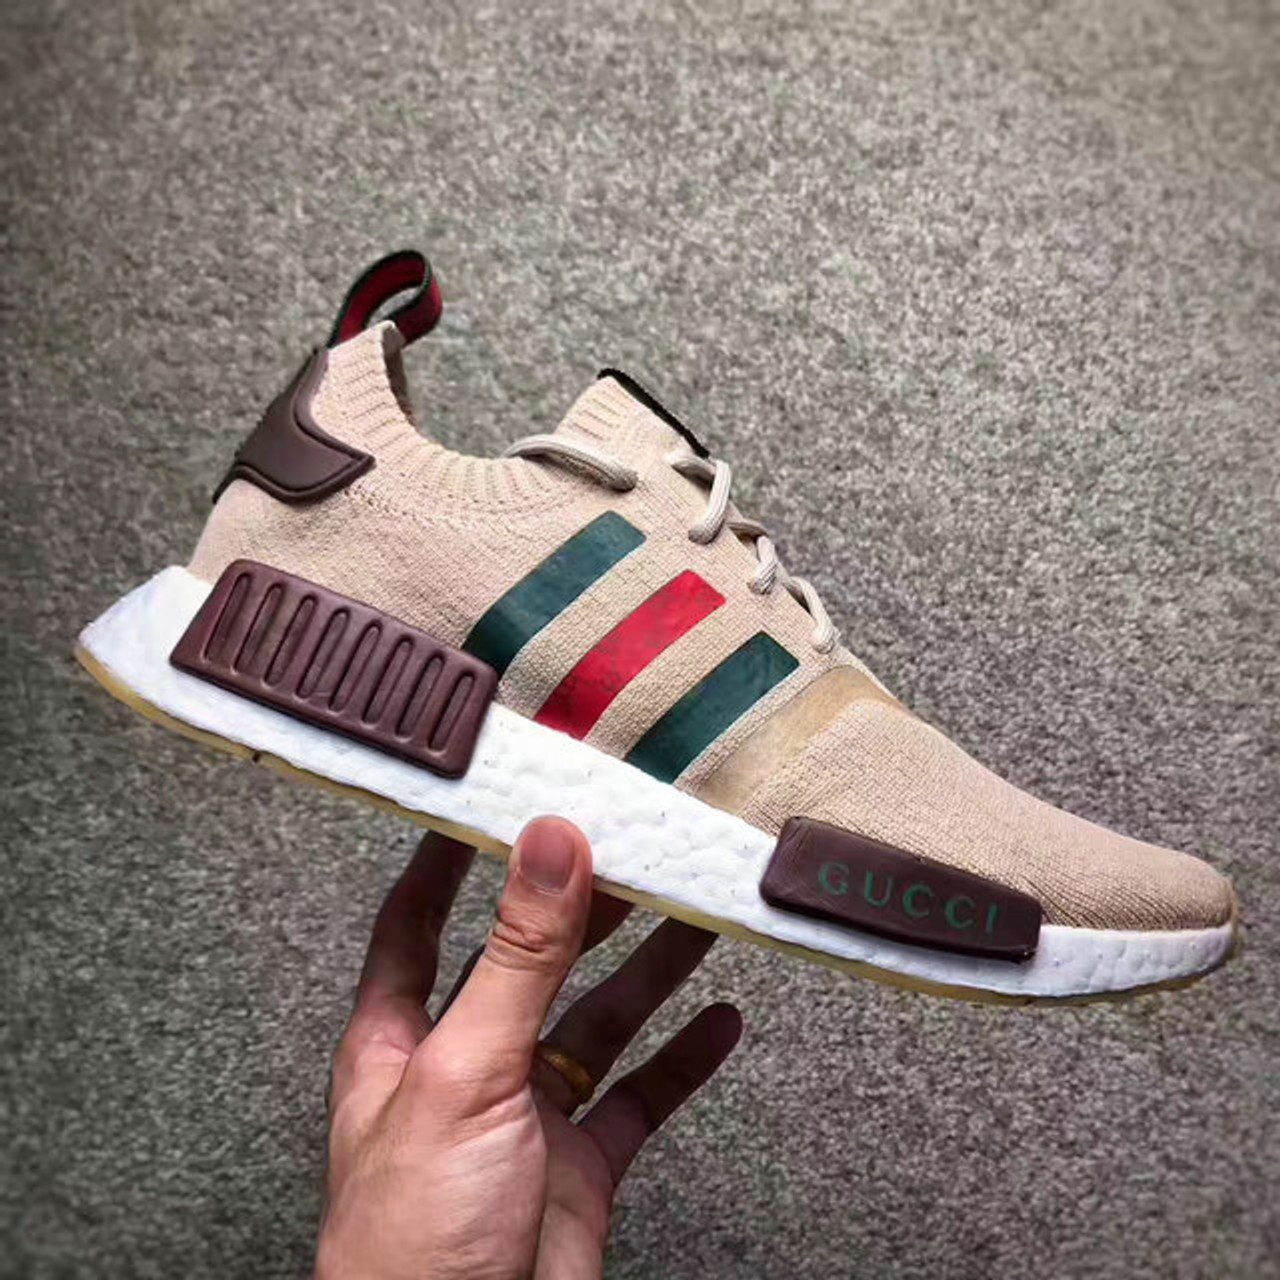 to buy the best stockX High quality replica UA Adidas NMD Supreme X LV X Gucci collab sneaker Hypedripz is the best high quality trusted replica fake designer hypebeast